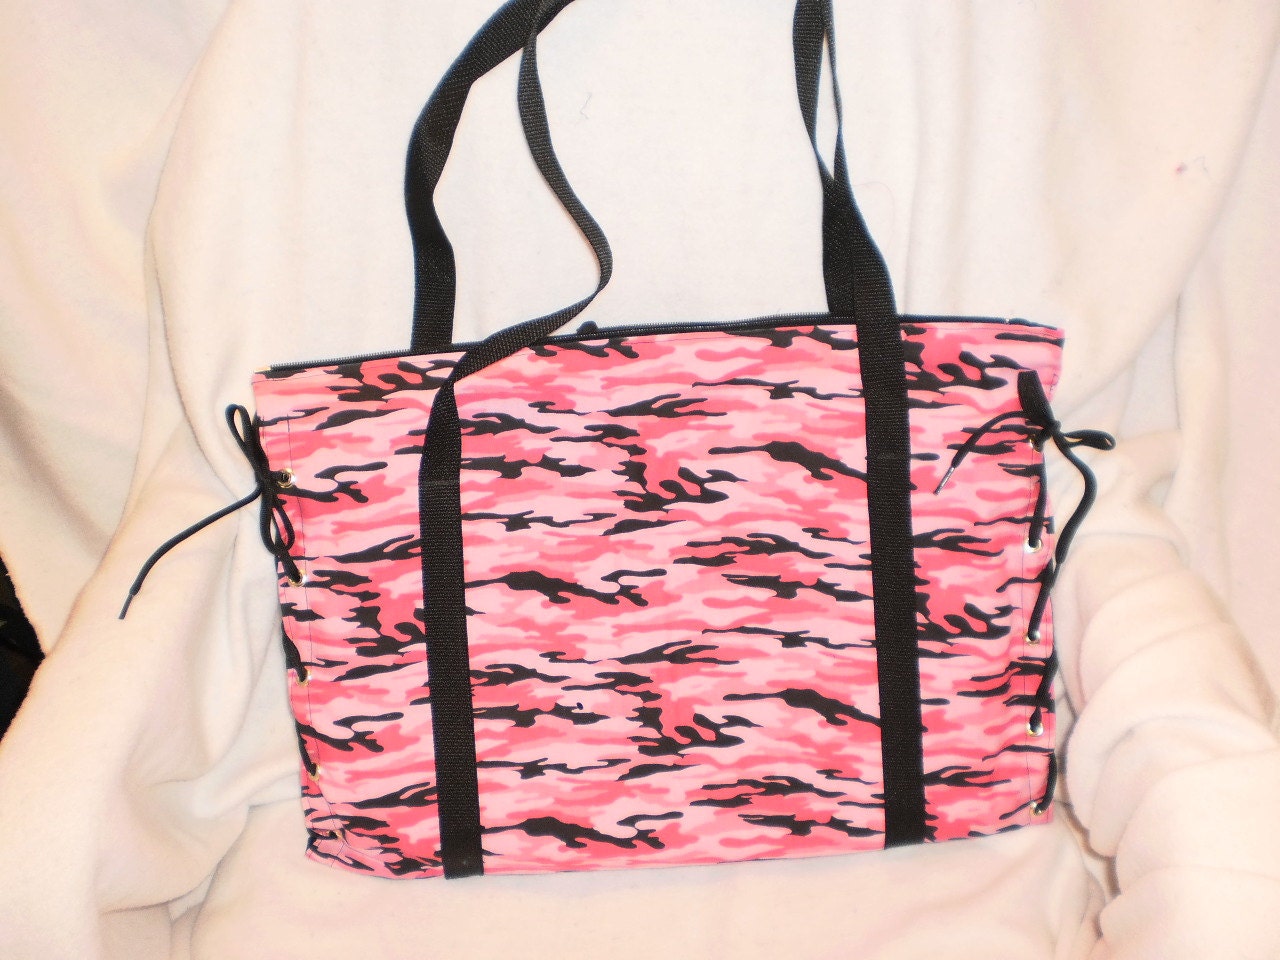 pink & black camo diaper bag by bagsbyjune on Etsy